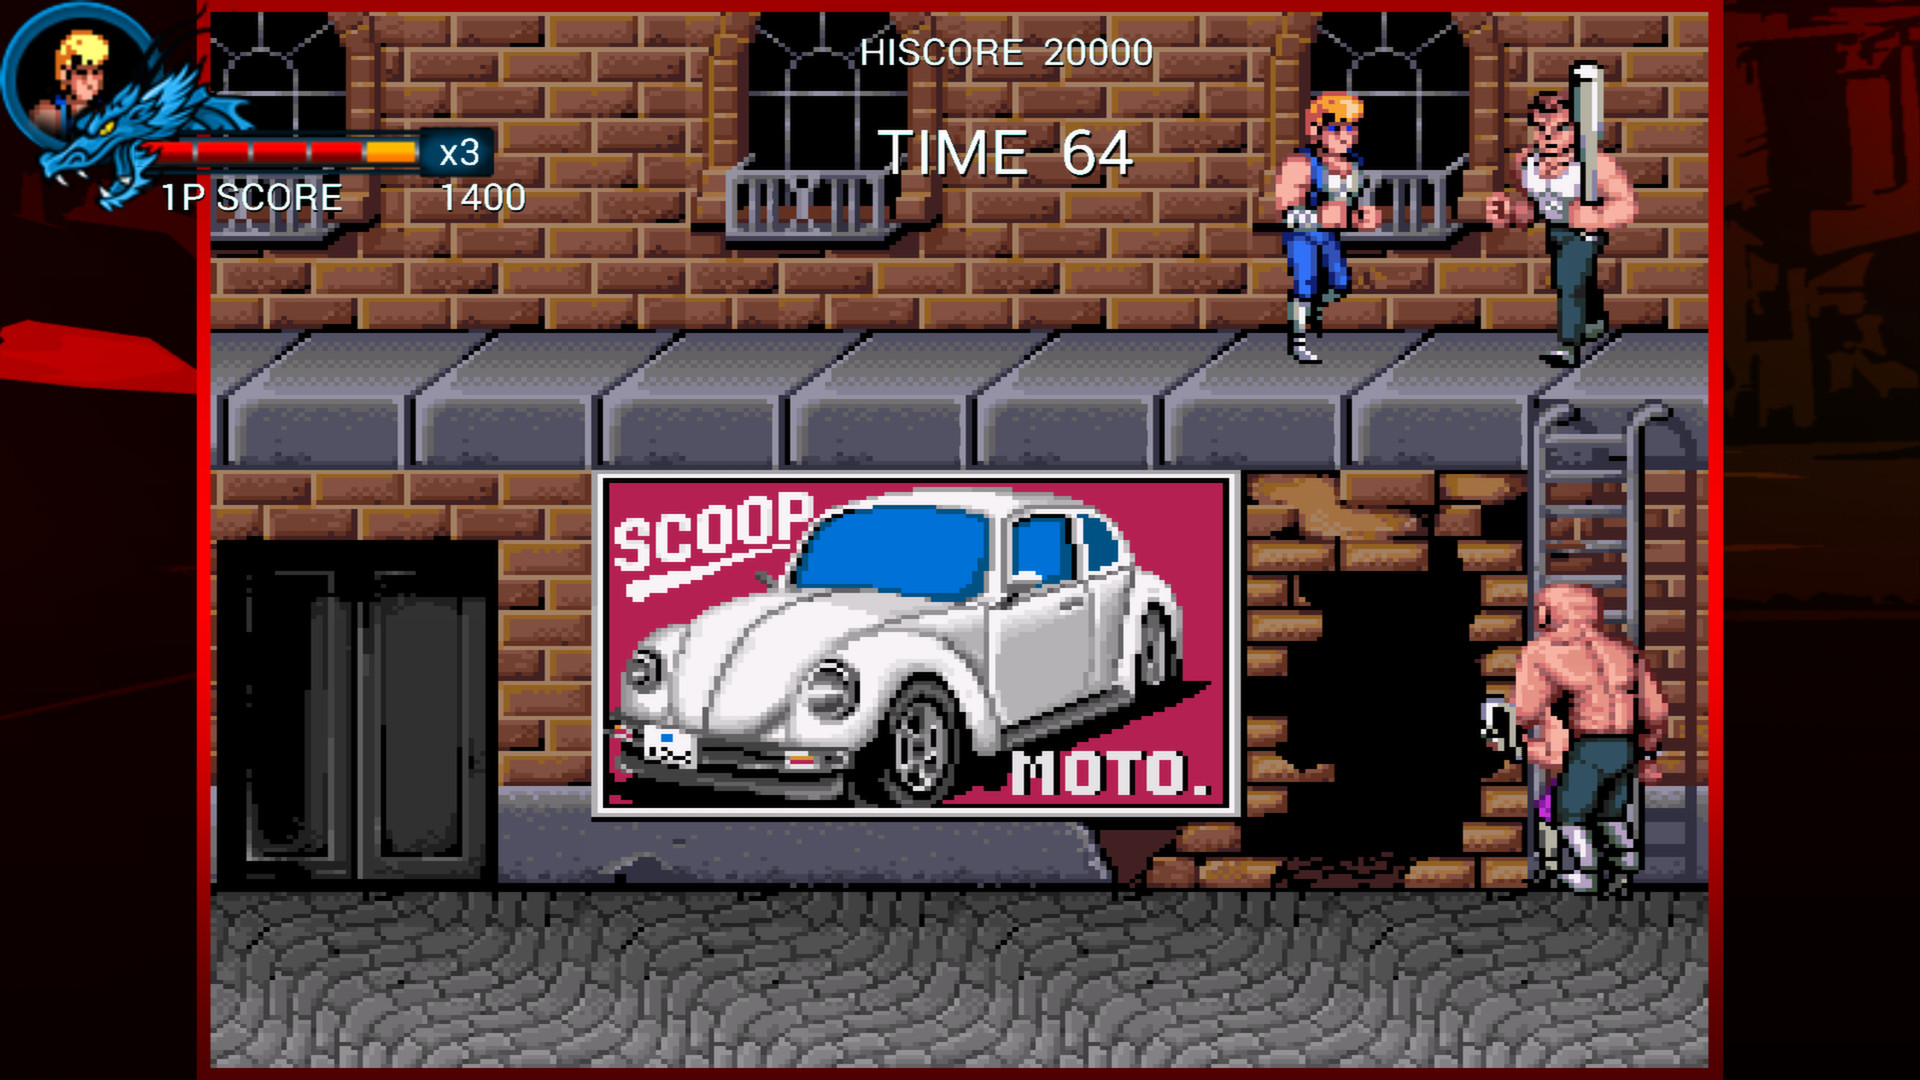 Double Dragon Trilogy on Steam